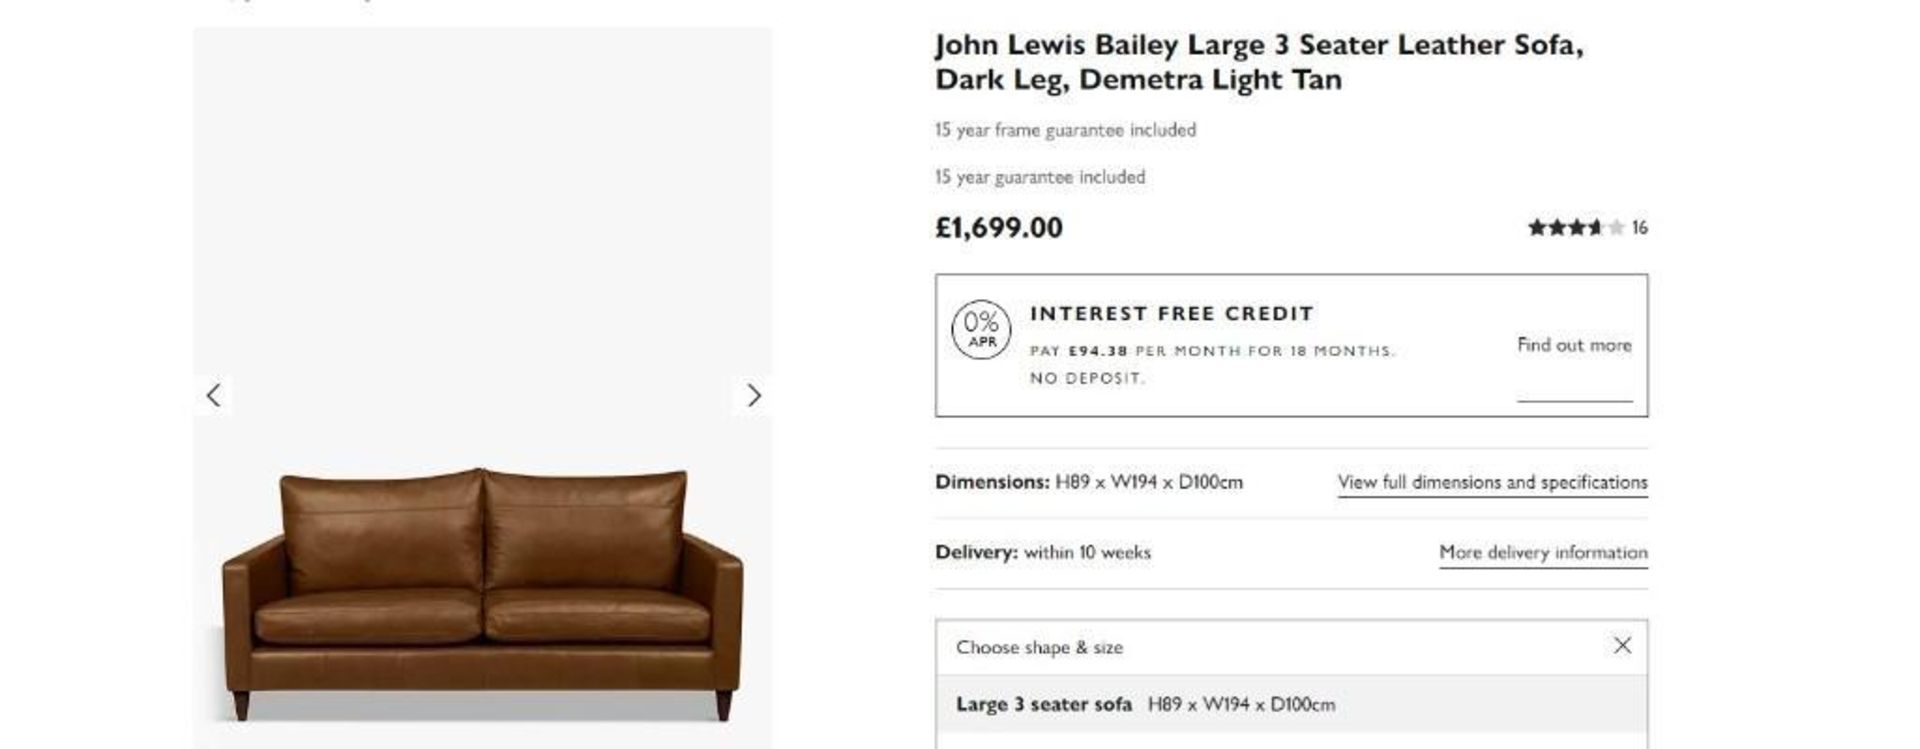 BRAND NEW John Lewis Bailey full leather 3 seater sofa in Tan. RRP: £1,699.00 - Image 4 of 4